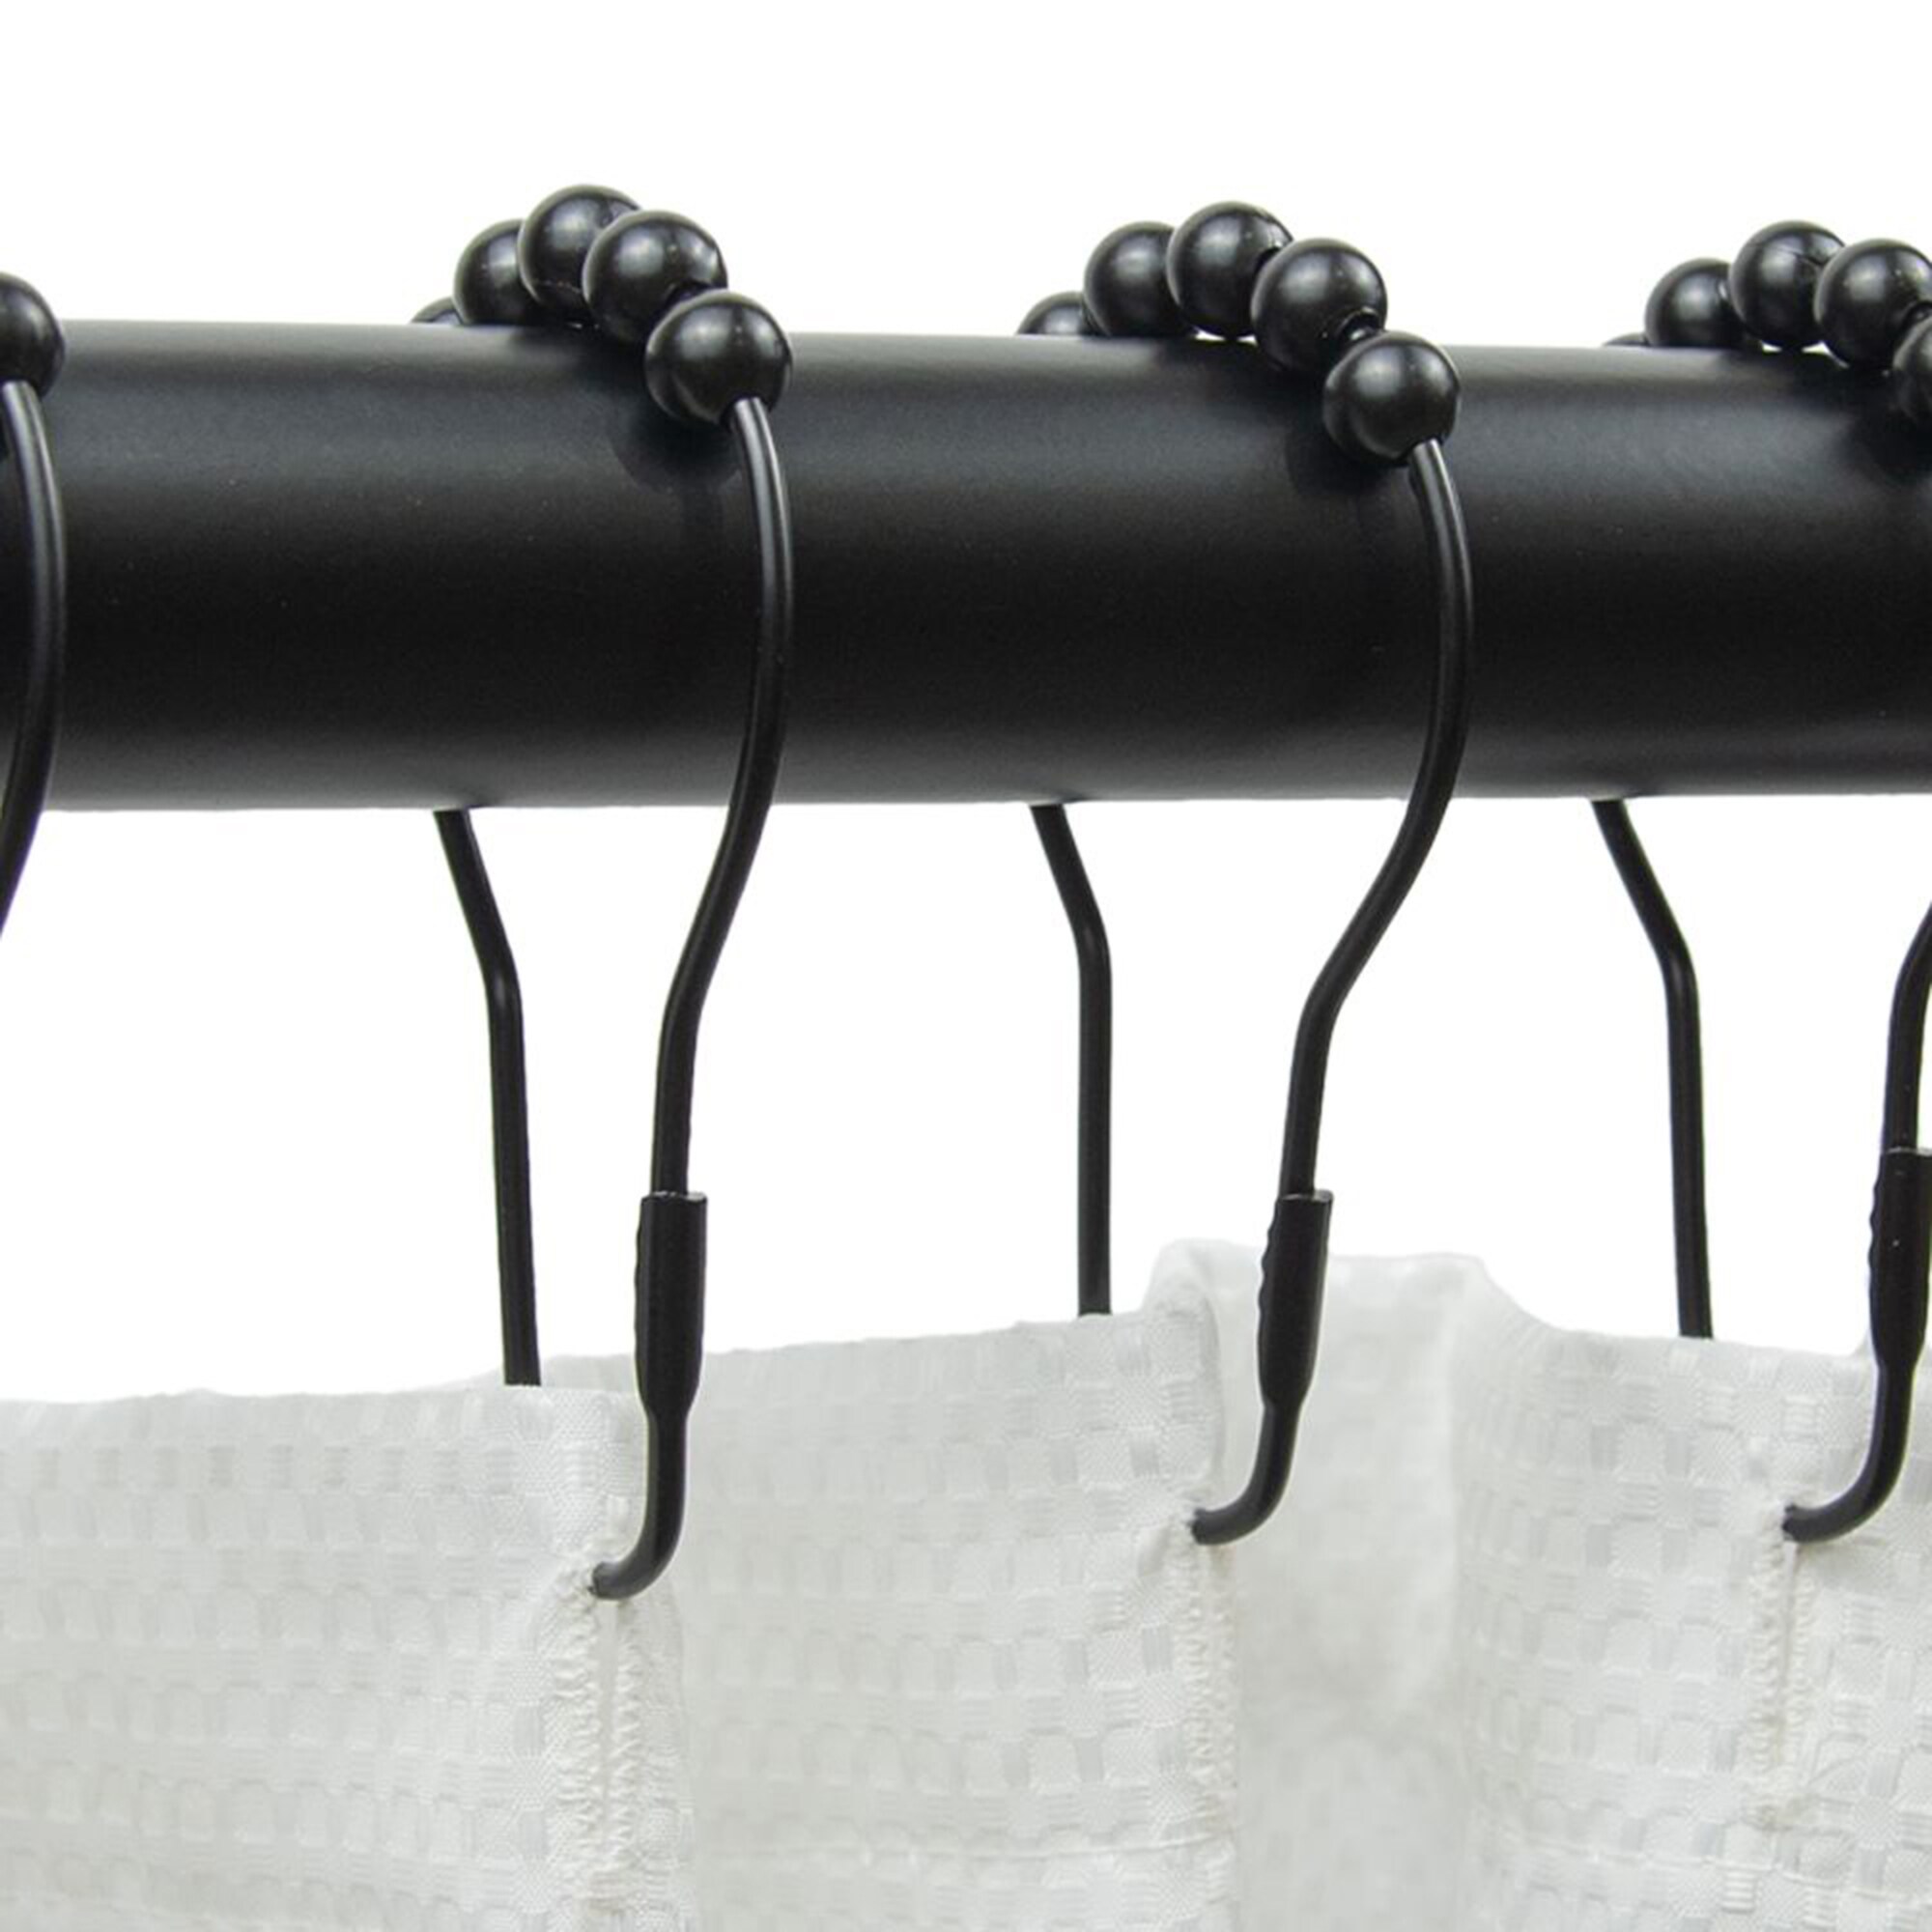 allen + roth Matte Black Stainless Steel Single Shower Curtain Hooks (12- Pack) in the Shower Rings & Hooks department at